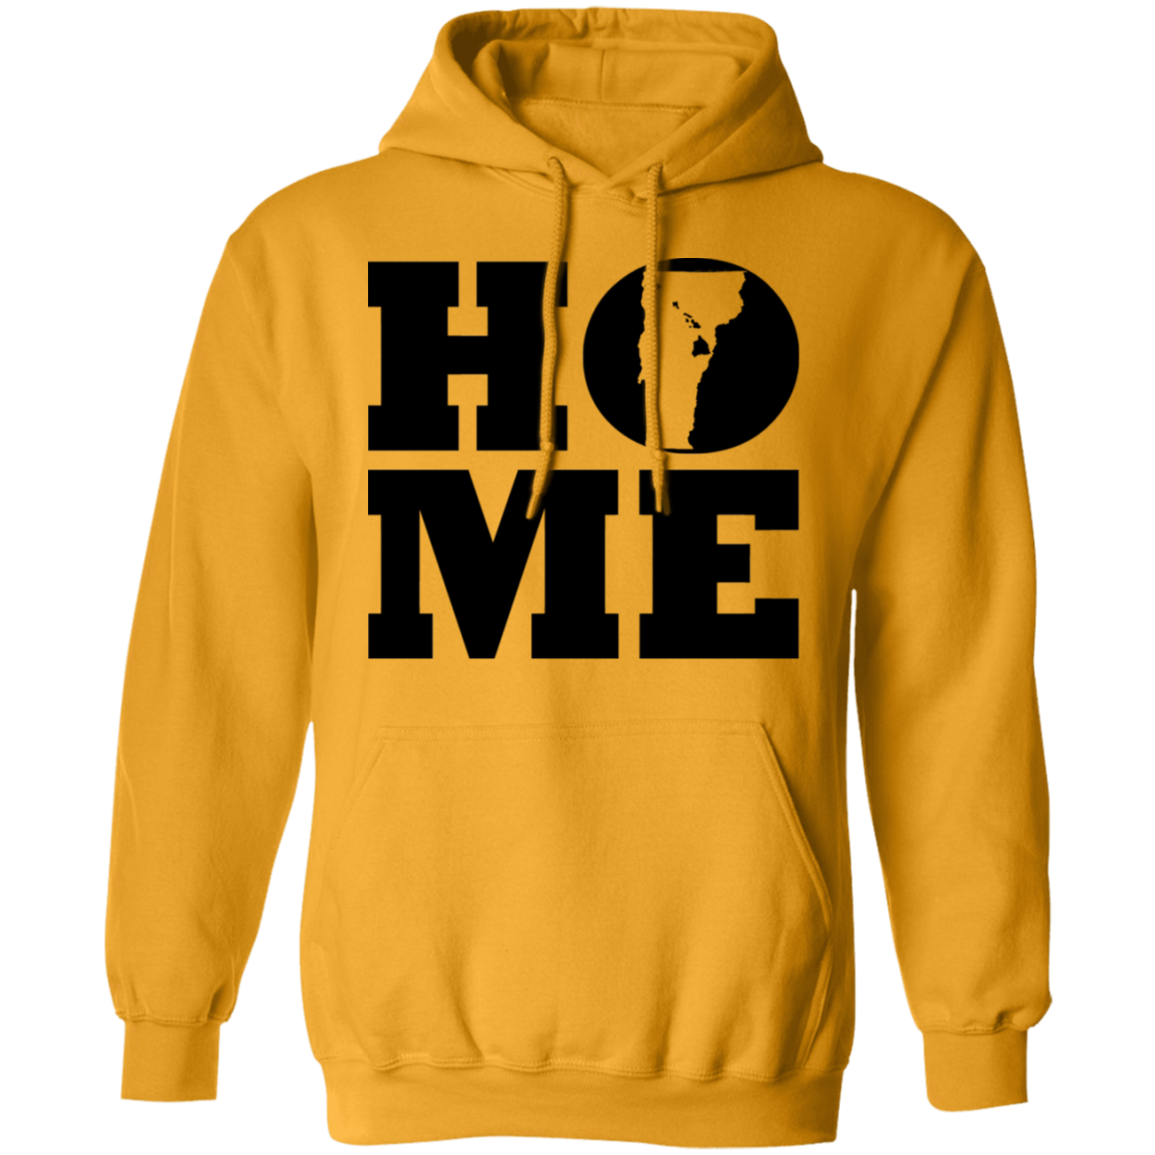 Home Roots Hawai'i and Vermont Pullover Hoodie